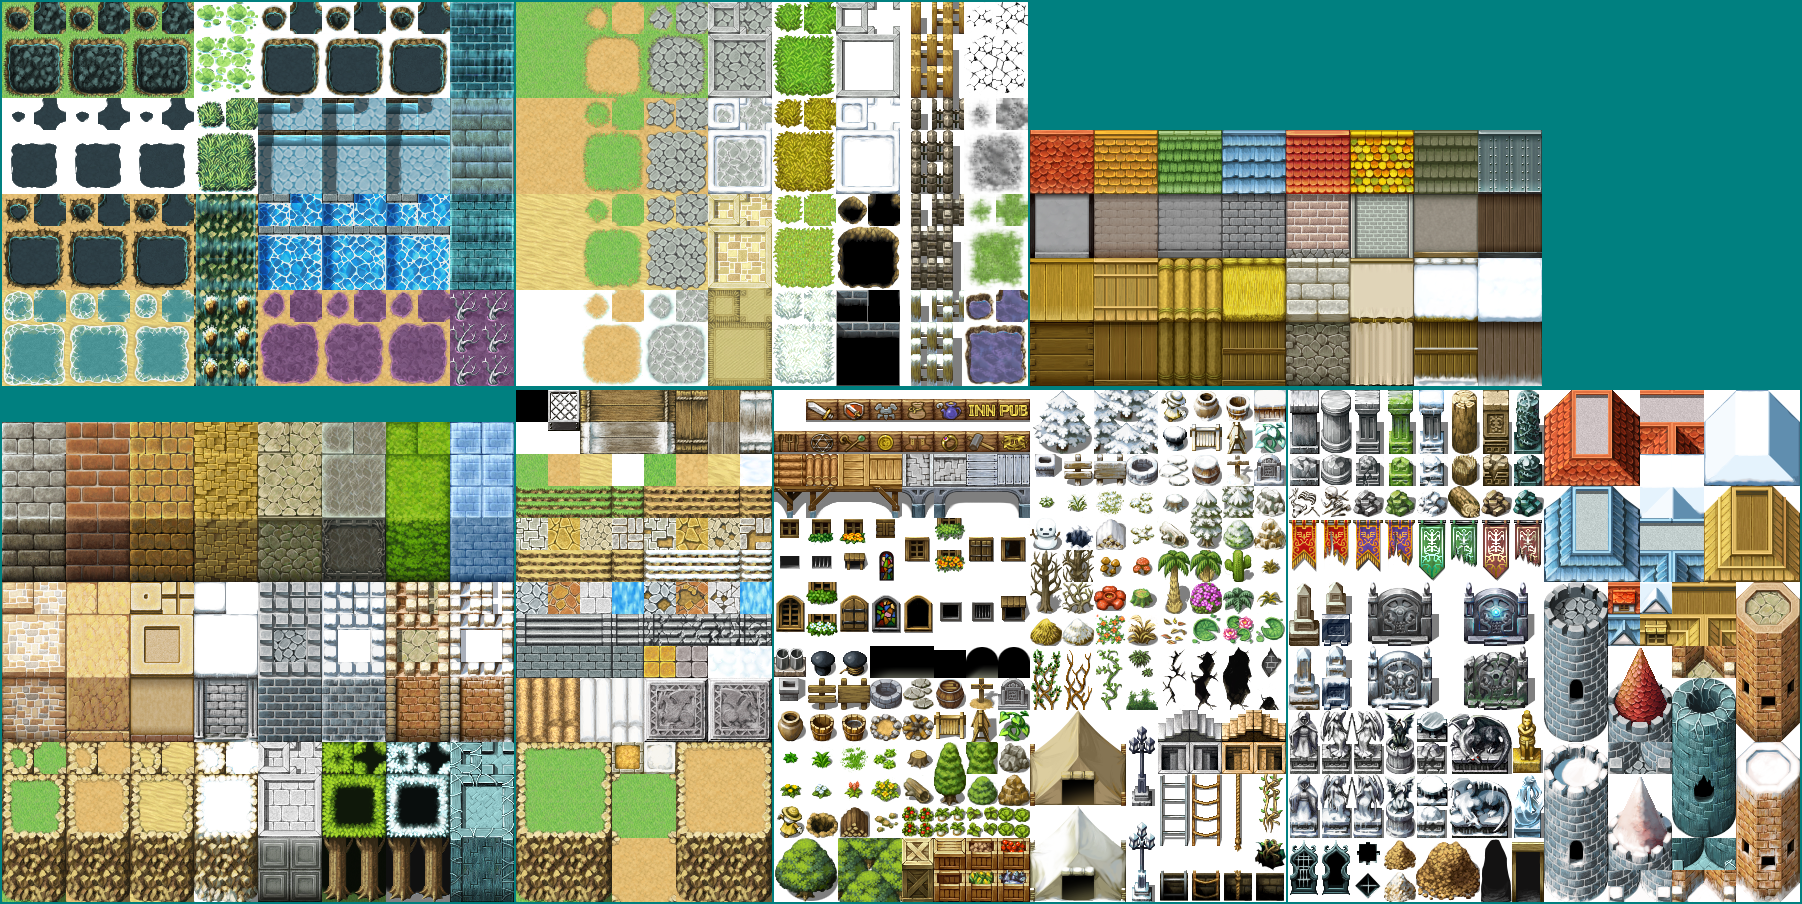 The Spriters Resource - Full Sheet View - RPG Maker VX Ace - Outside